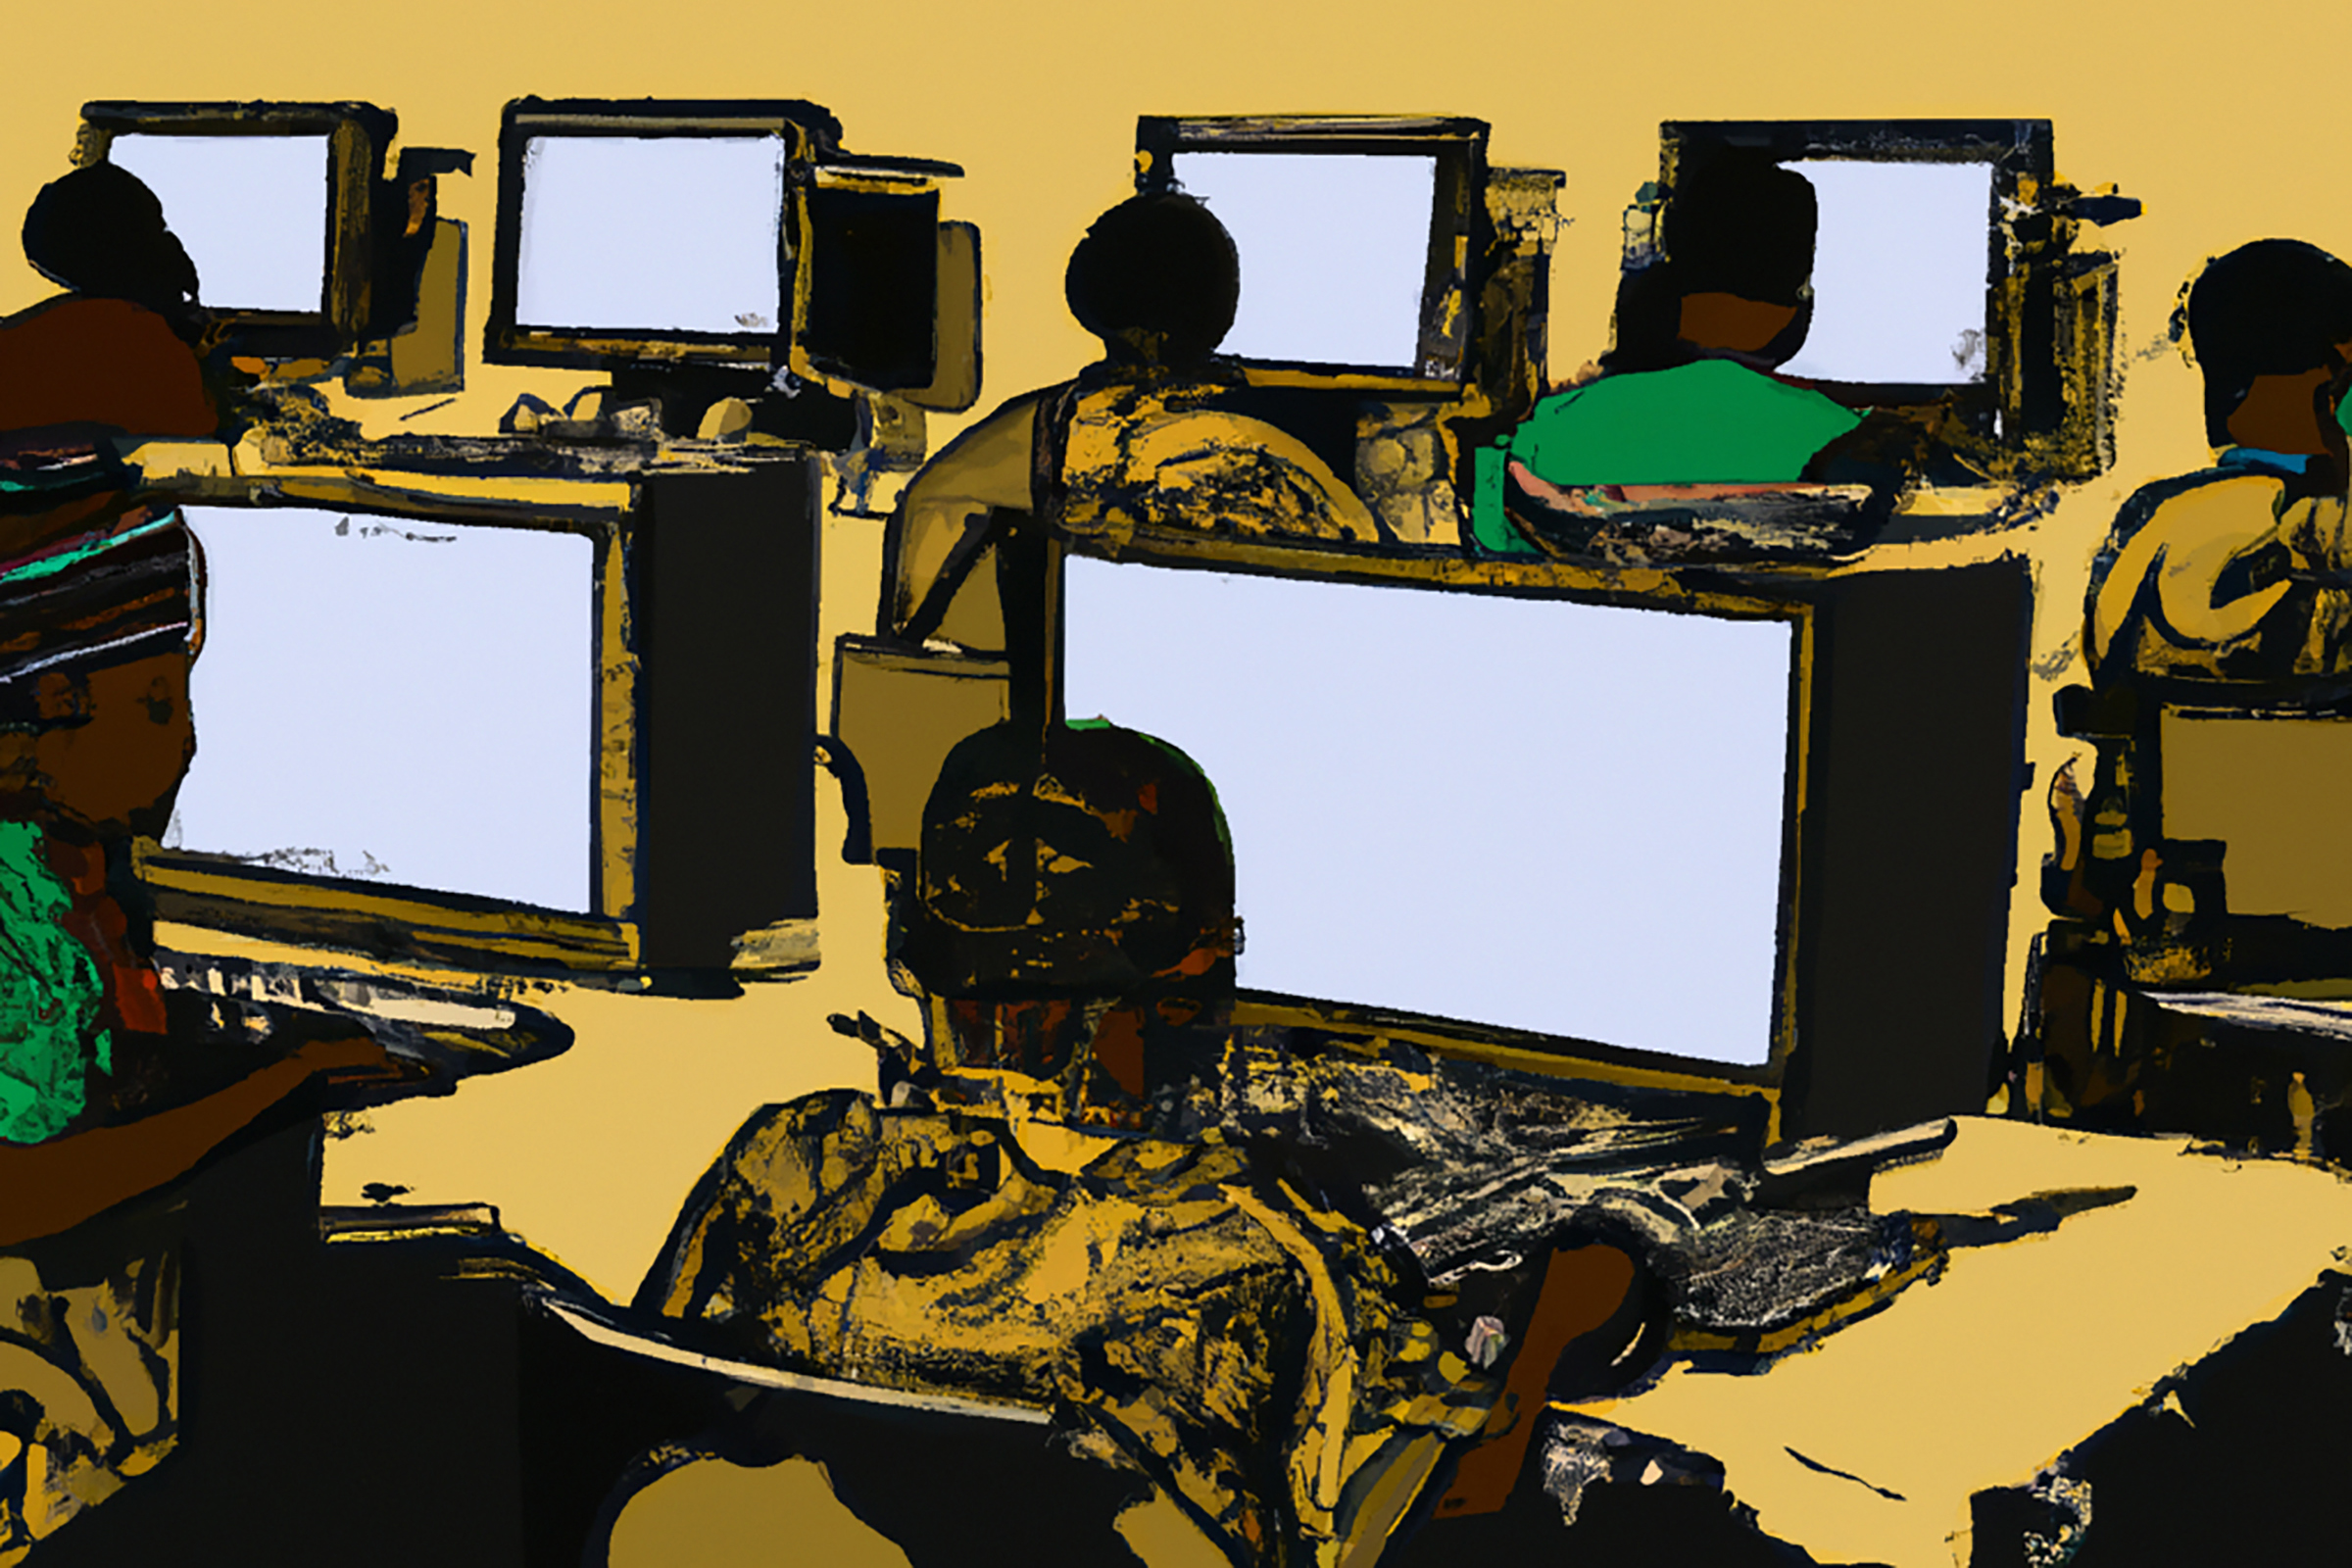 This image was generated by OpenAI's image-generation software, Dall-E 2. The prompt was: "A seemingly endless view of African workers at desks in front of computer screens in a printmaking style." TIME does not typically use AI-generated art to illustrate its stories, but chose to in this instance in order to draw attention to the power of OpenAI's technology and shed light on the labor that makes it possible. (Image generated by Dall-E 2/OpenAI)